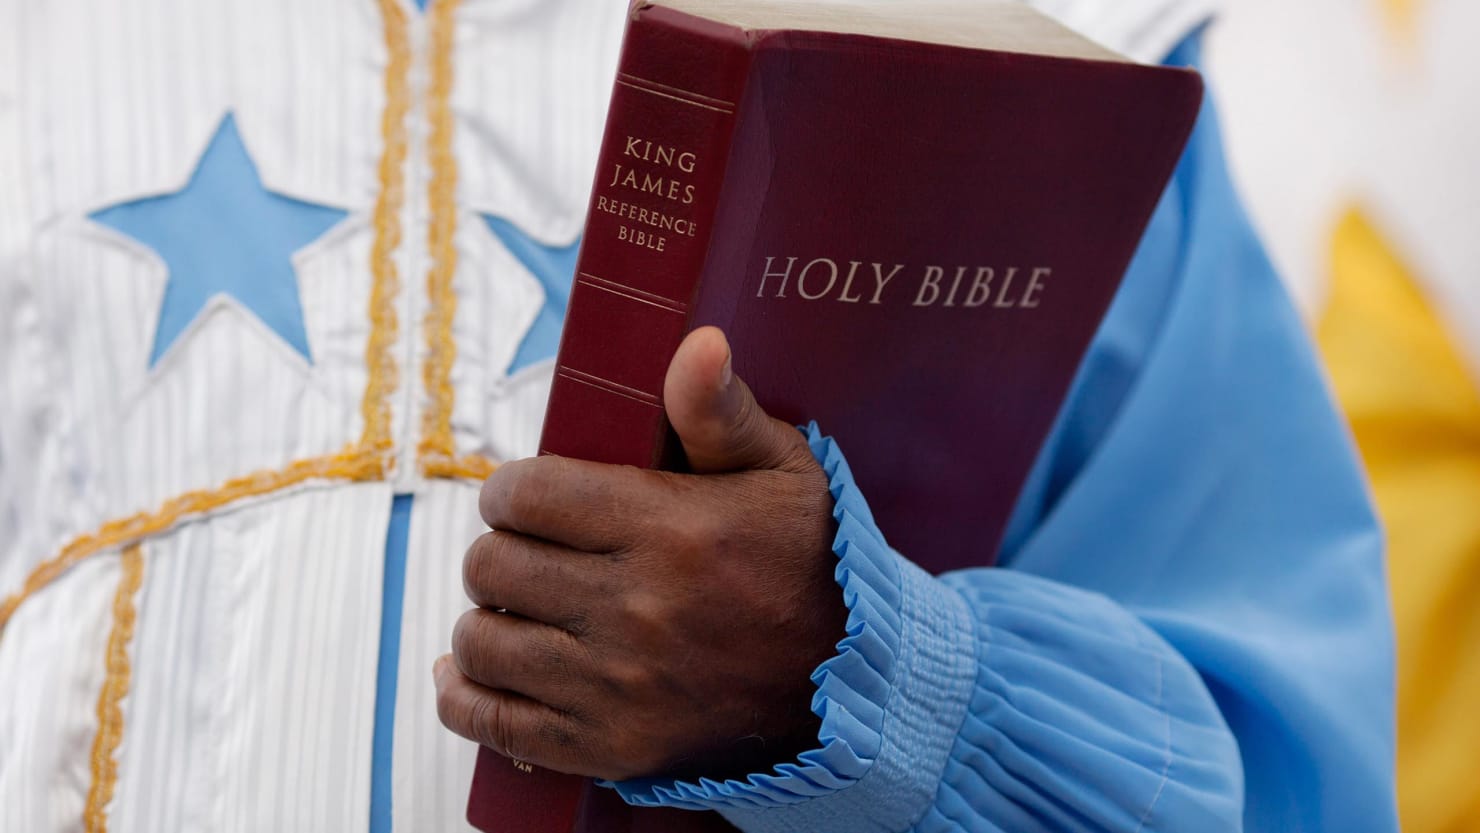 Bible Loved by Christian Fundamentalists Written Using Method They Hate